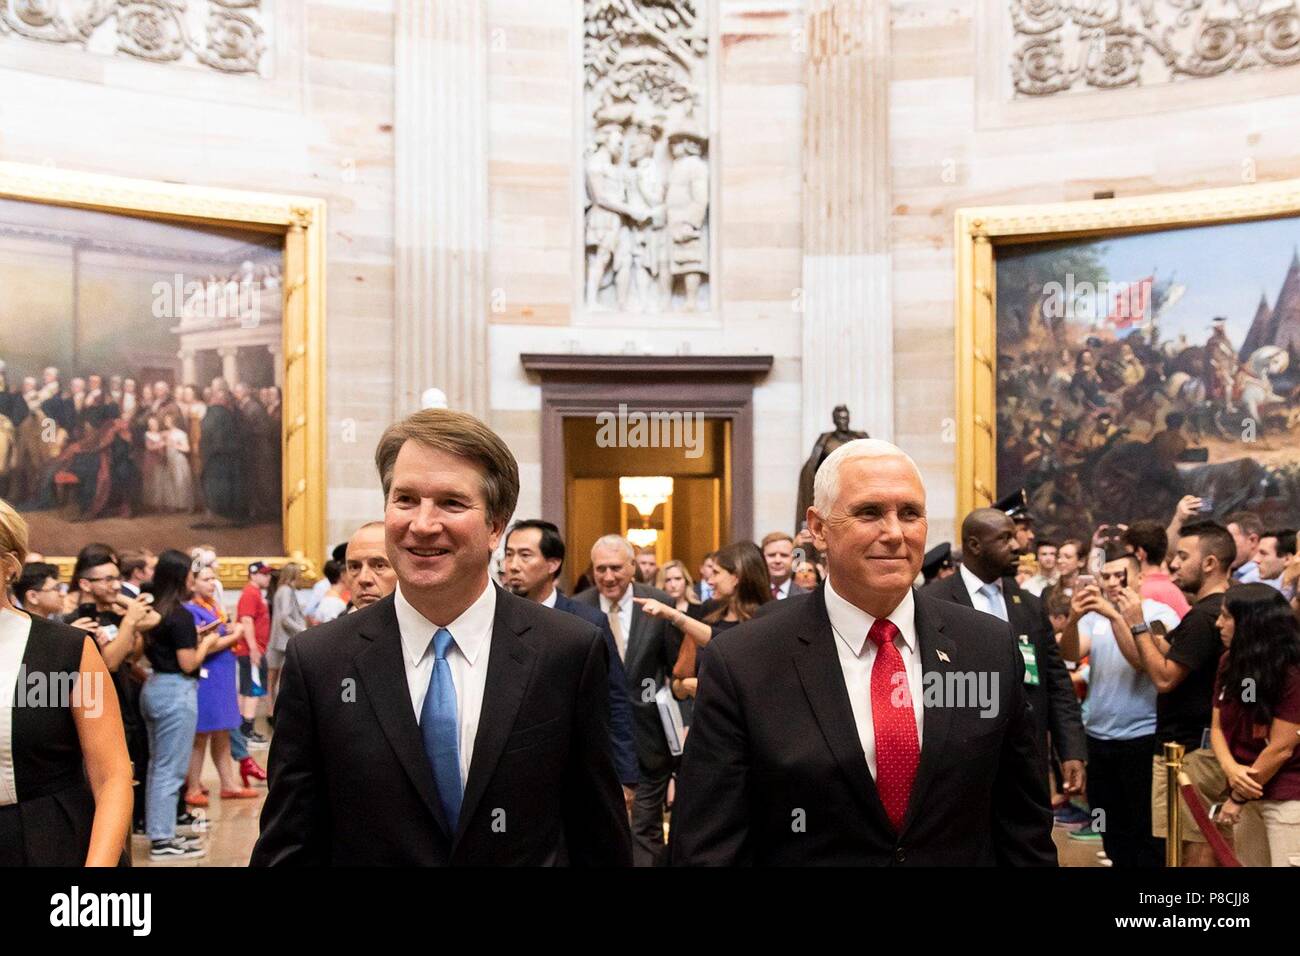 Washington, US. 10th July 2018. Supreme Court nominee Brett Kavanaugh, left, walks with U.S Vice President Mike Pence through the Capitol Rotunda on their way to meet with Senate Majority Leader Mitch McConnell July 10, 2018 in Washington, DC. Credit: Planetpix/Alamy Live News Stock Photo